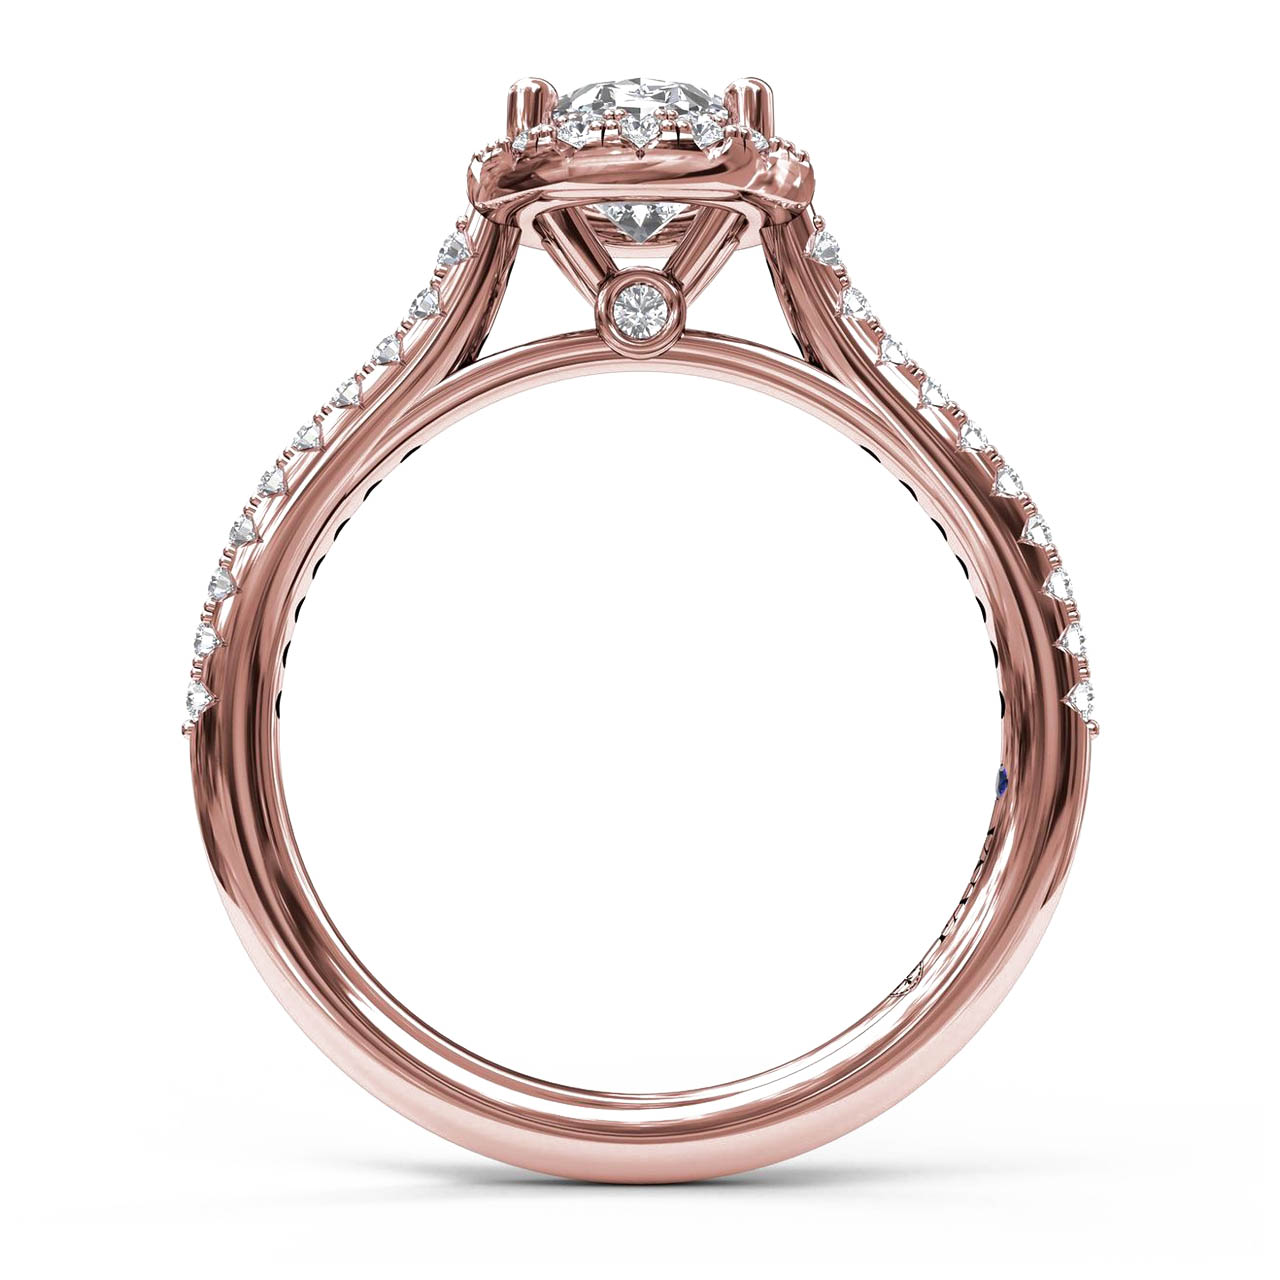 Fana Delicate Oval Shaped Halo And Pave Band Engagement Ring Setting in 14kt Rose Gold (1/3ct tw)